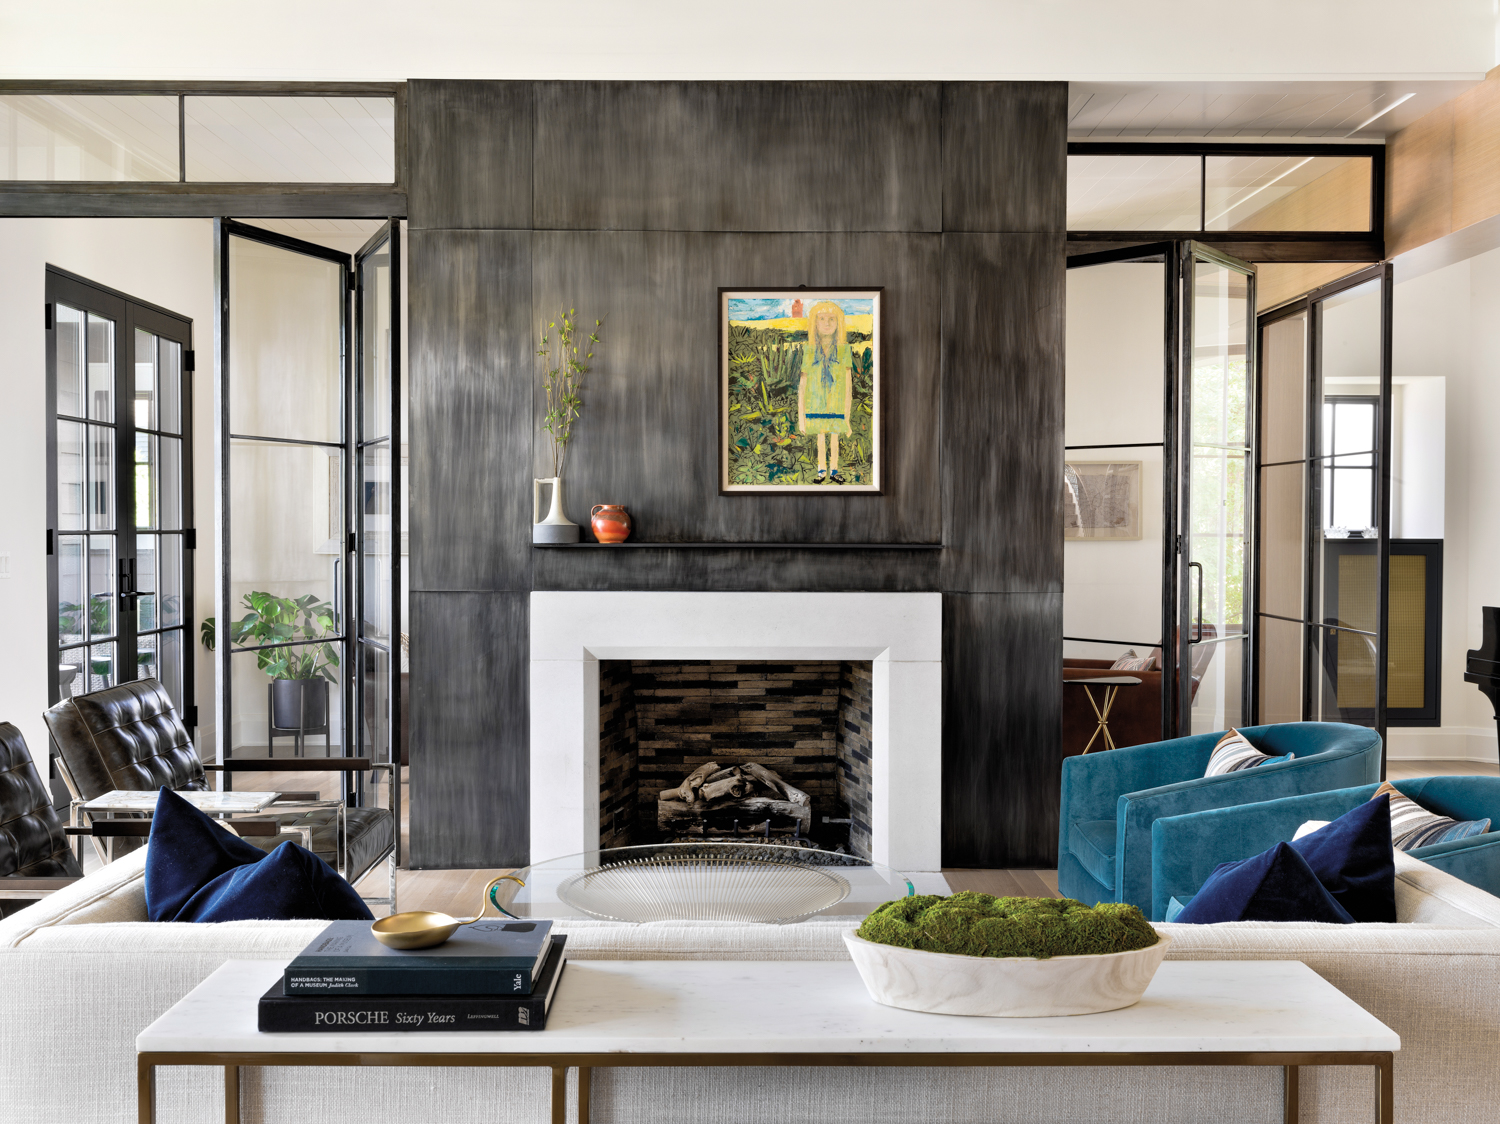 A fireplace with a steel surround is the focal point of a living room. It is surrounded by a white couch, two blue swivel chairs and two leather armchairs. A painting of a young girl hangs above the fireplace.